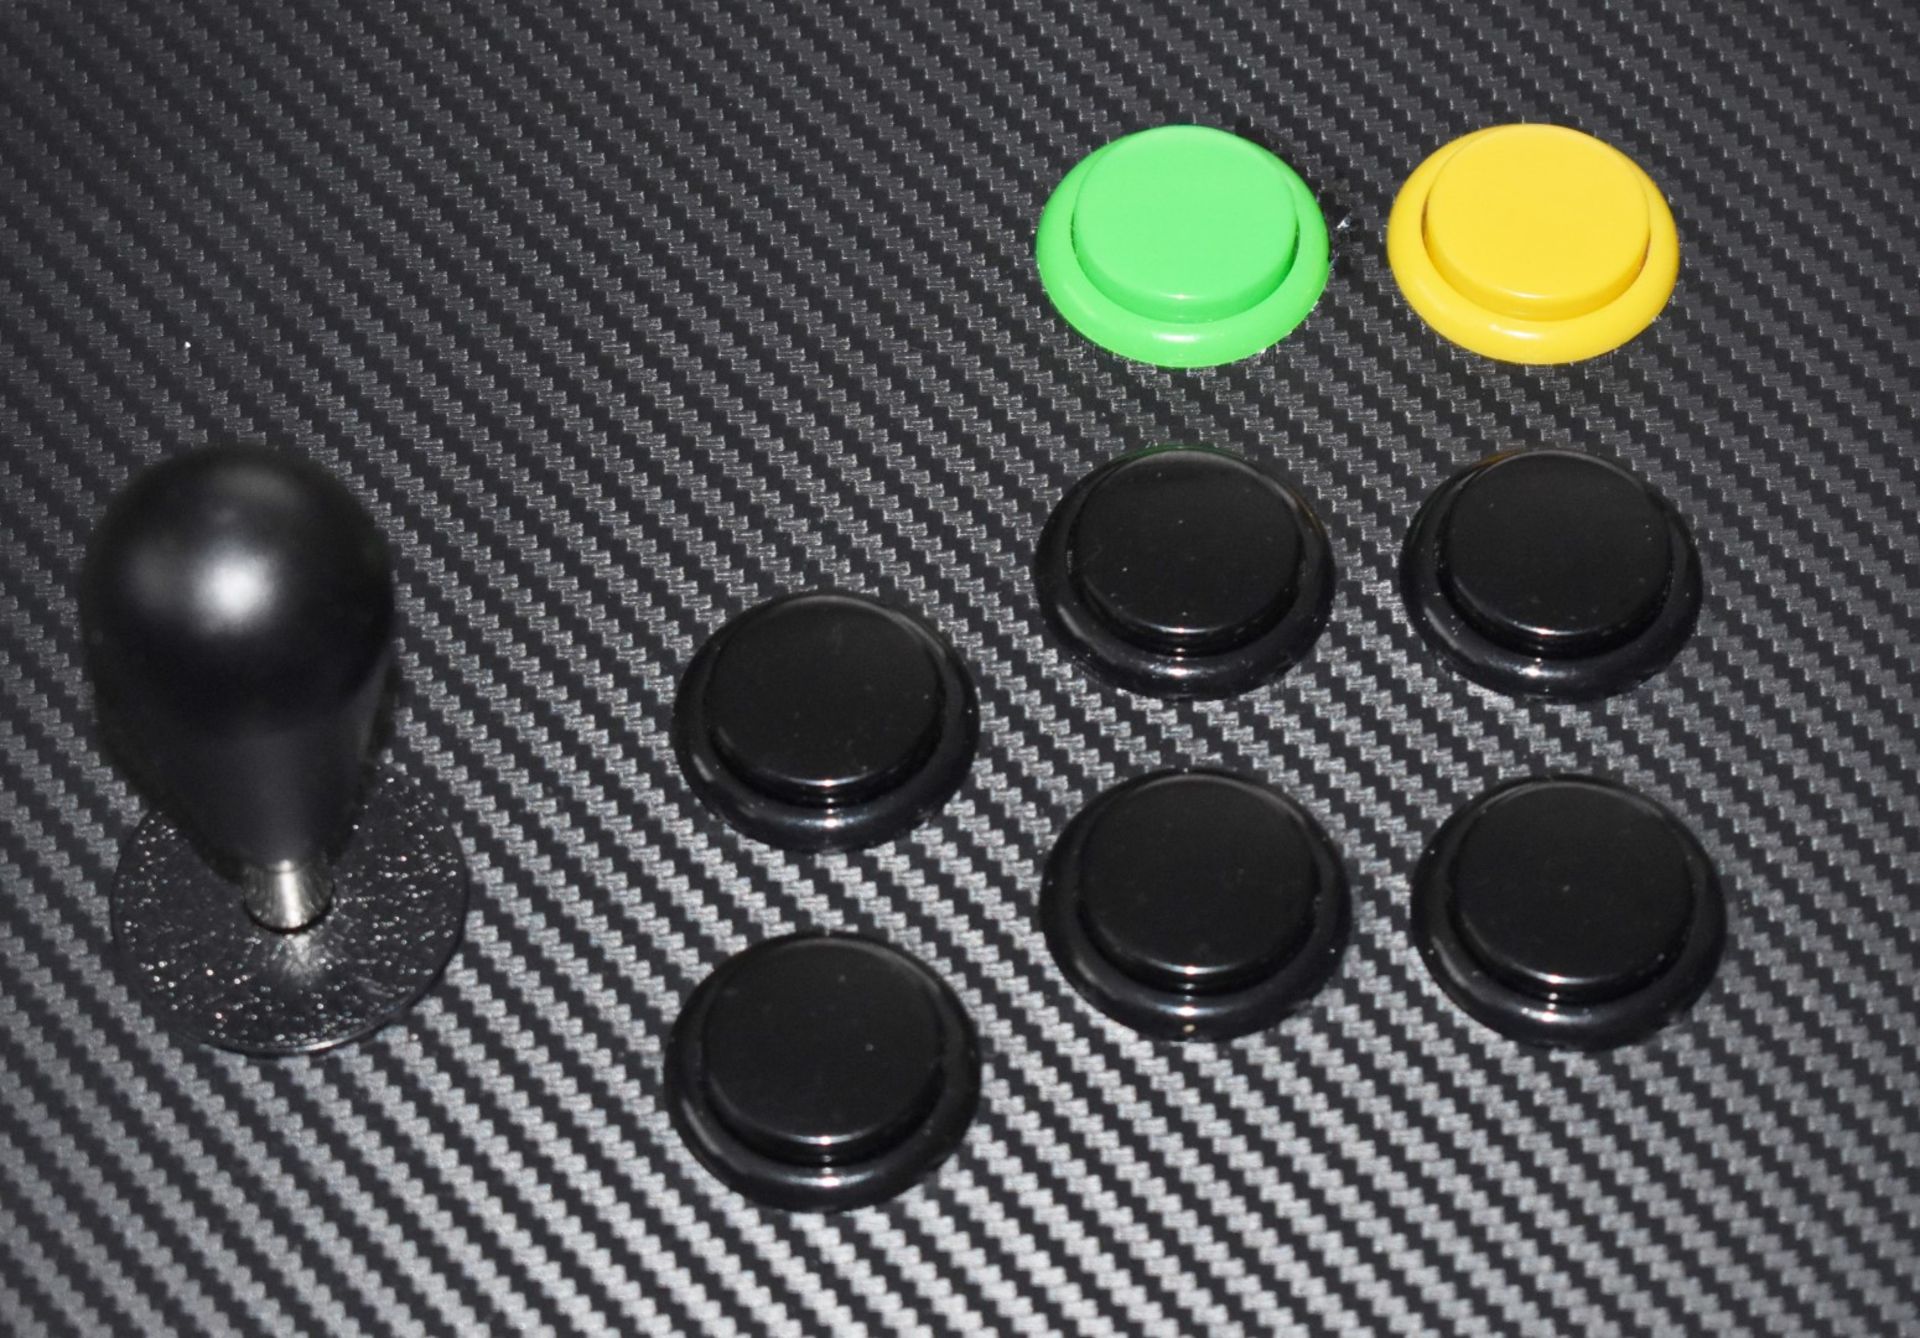 1 x Custom Two Player Arcade Control Stick - Pandoras Box With Games - NO VAT ON THE HAMMER! - Image 9 of 12